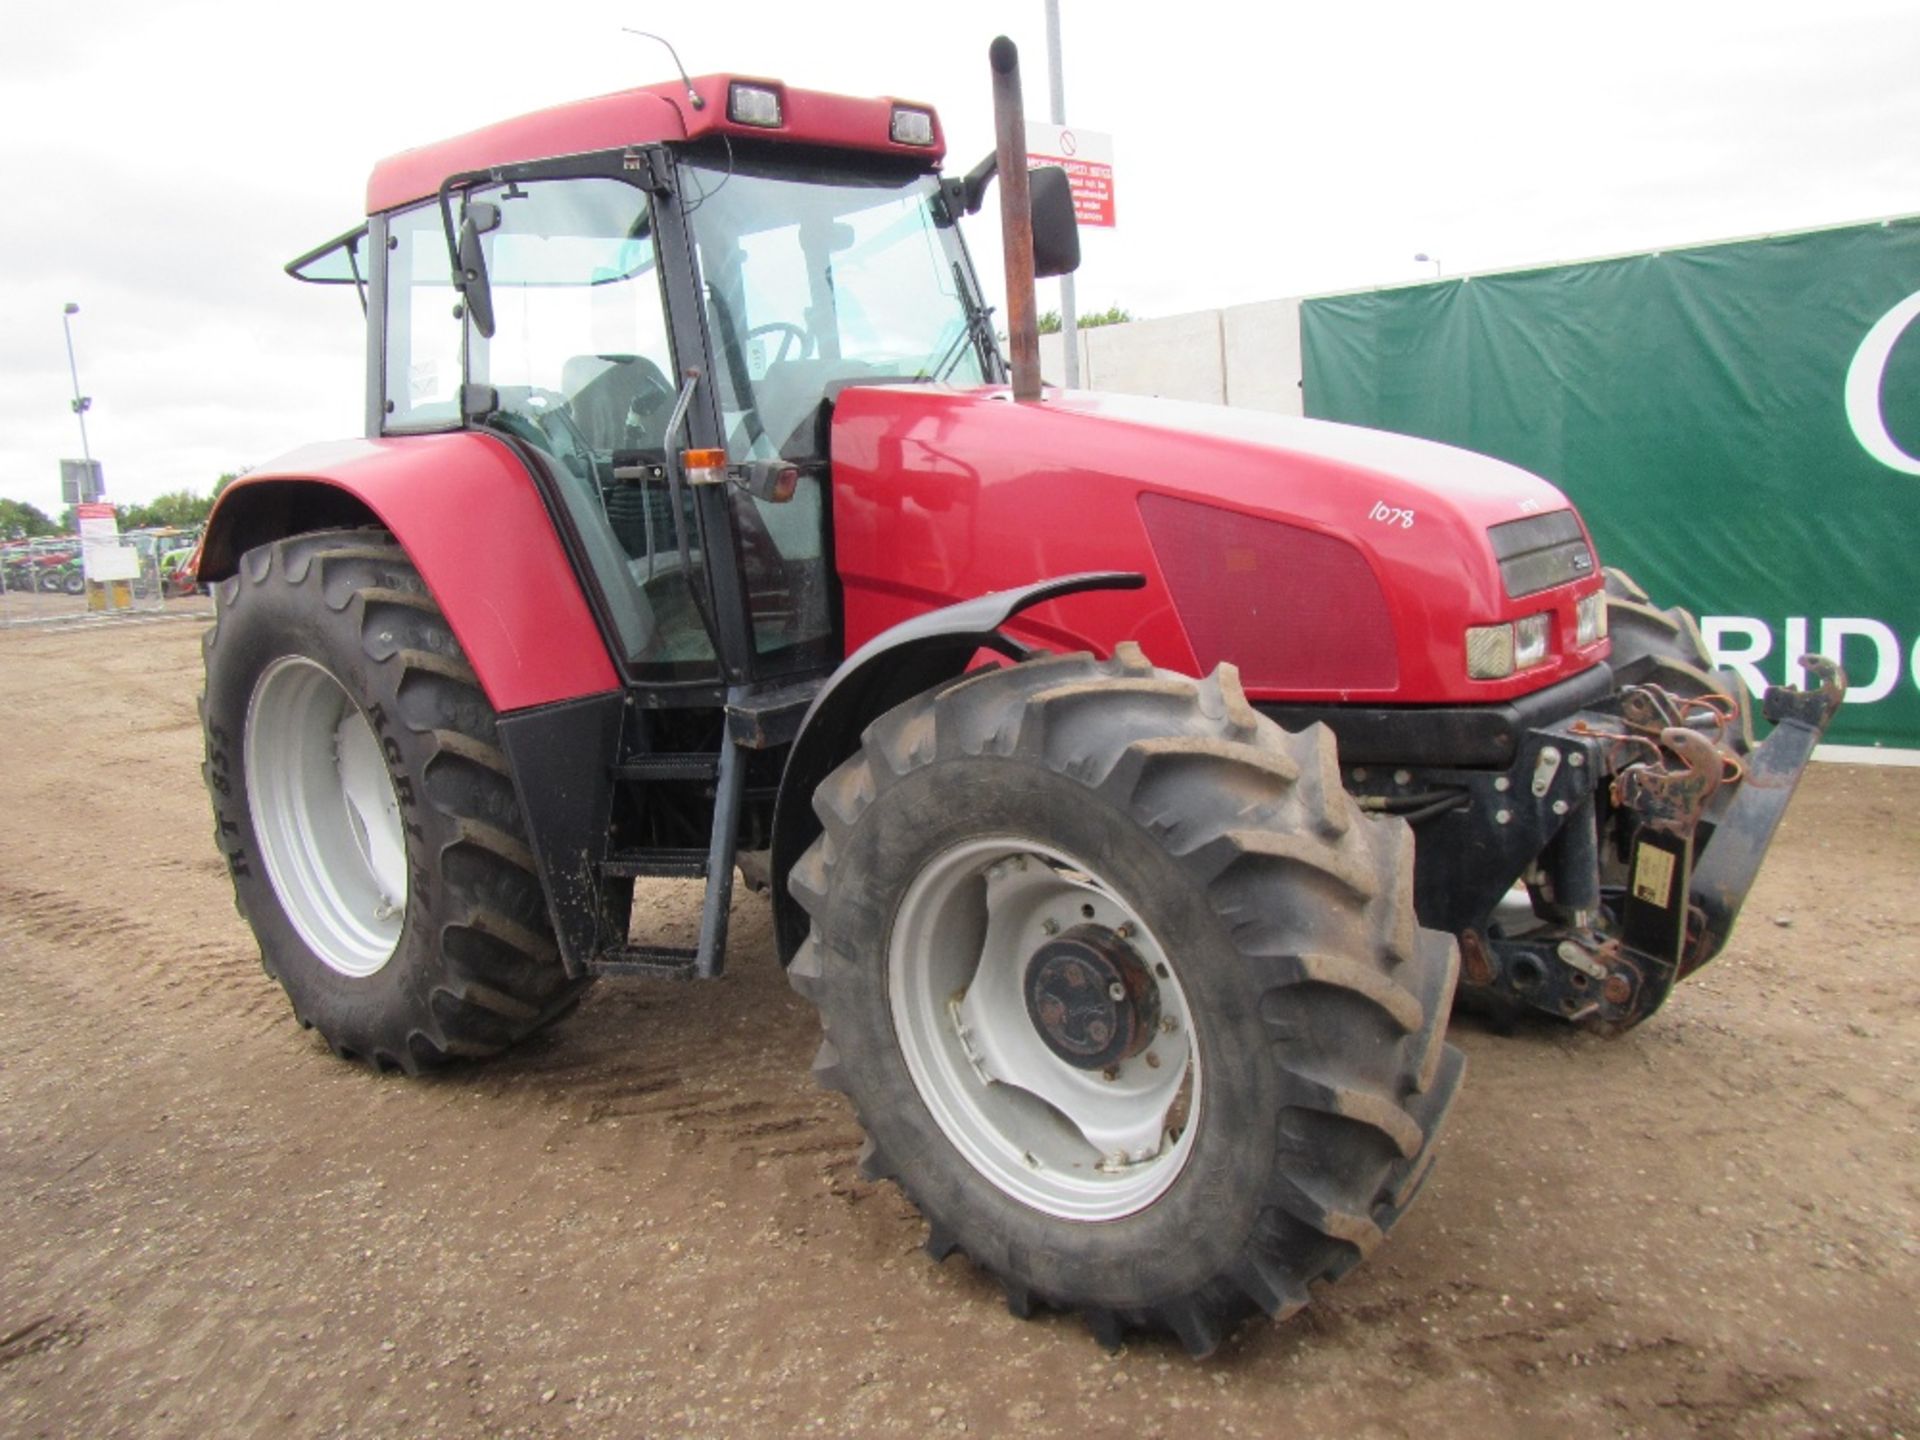 1998 Case CS150 Tractor 6700 hrs. Reg. No. R398 UHE - Image 3 of 17